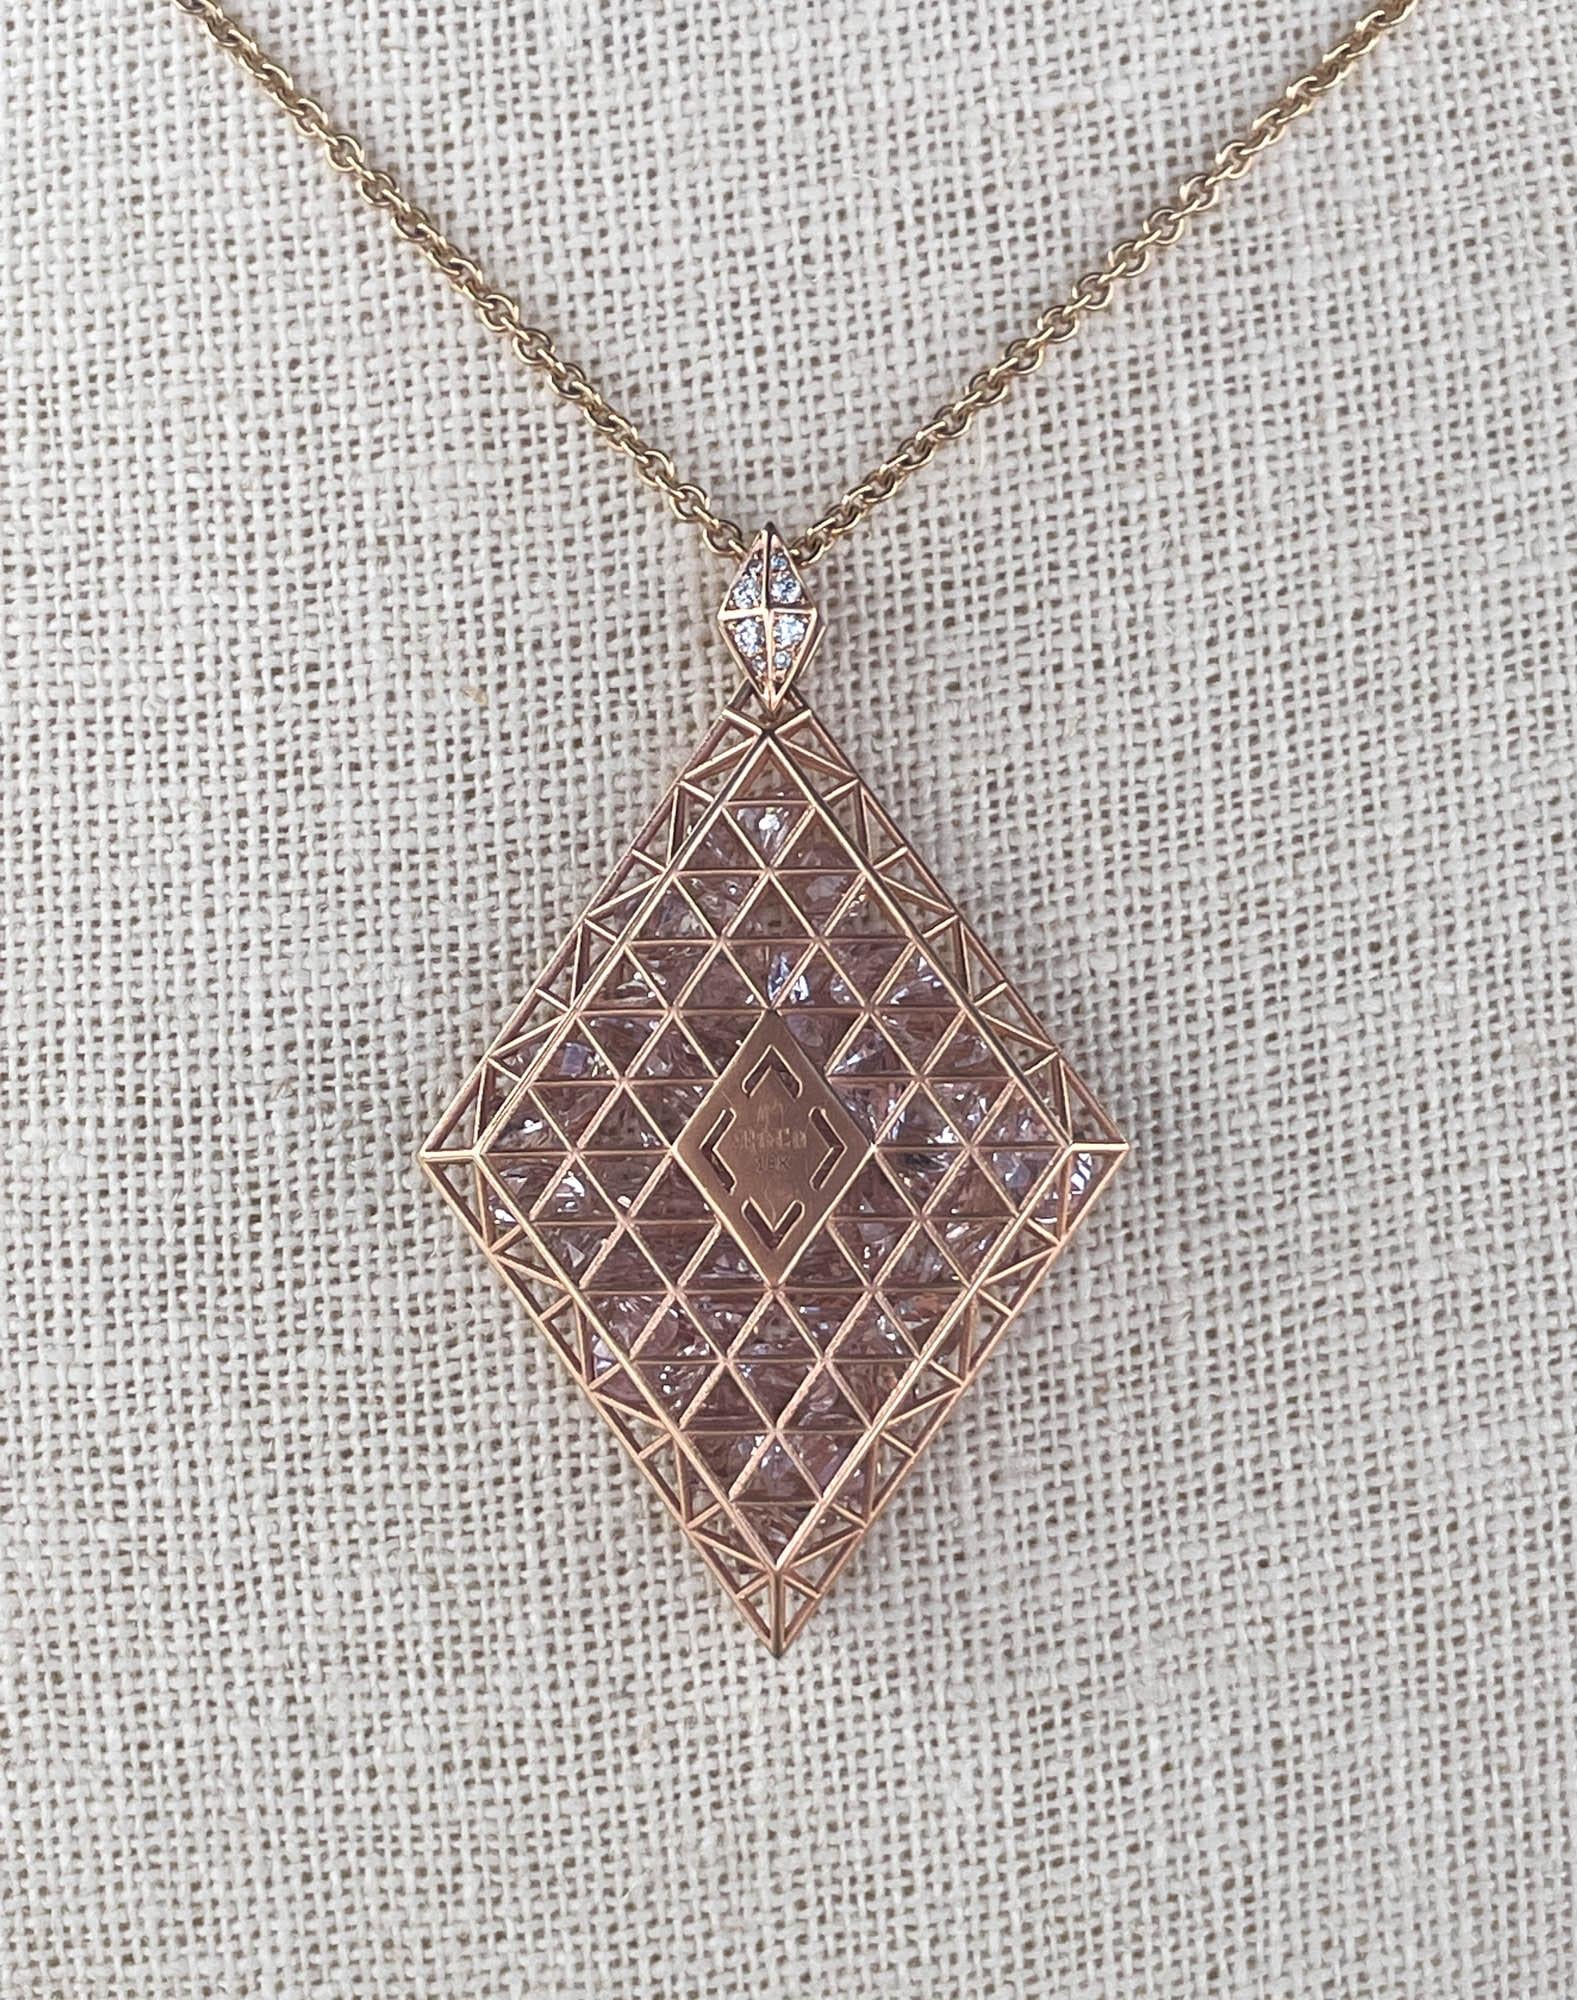 Roule & Co 18k Rose Gold Morganite Pendant Necklace with 23.26ctw Morganites.
Rhombus shaped pendant measures to approx. 50x35mm and 56mm long with diamond loop.
The Cable link chain is 30 inches in length and secured with a lobster clasp.
The total